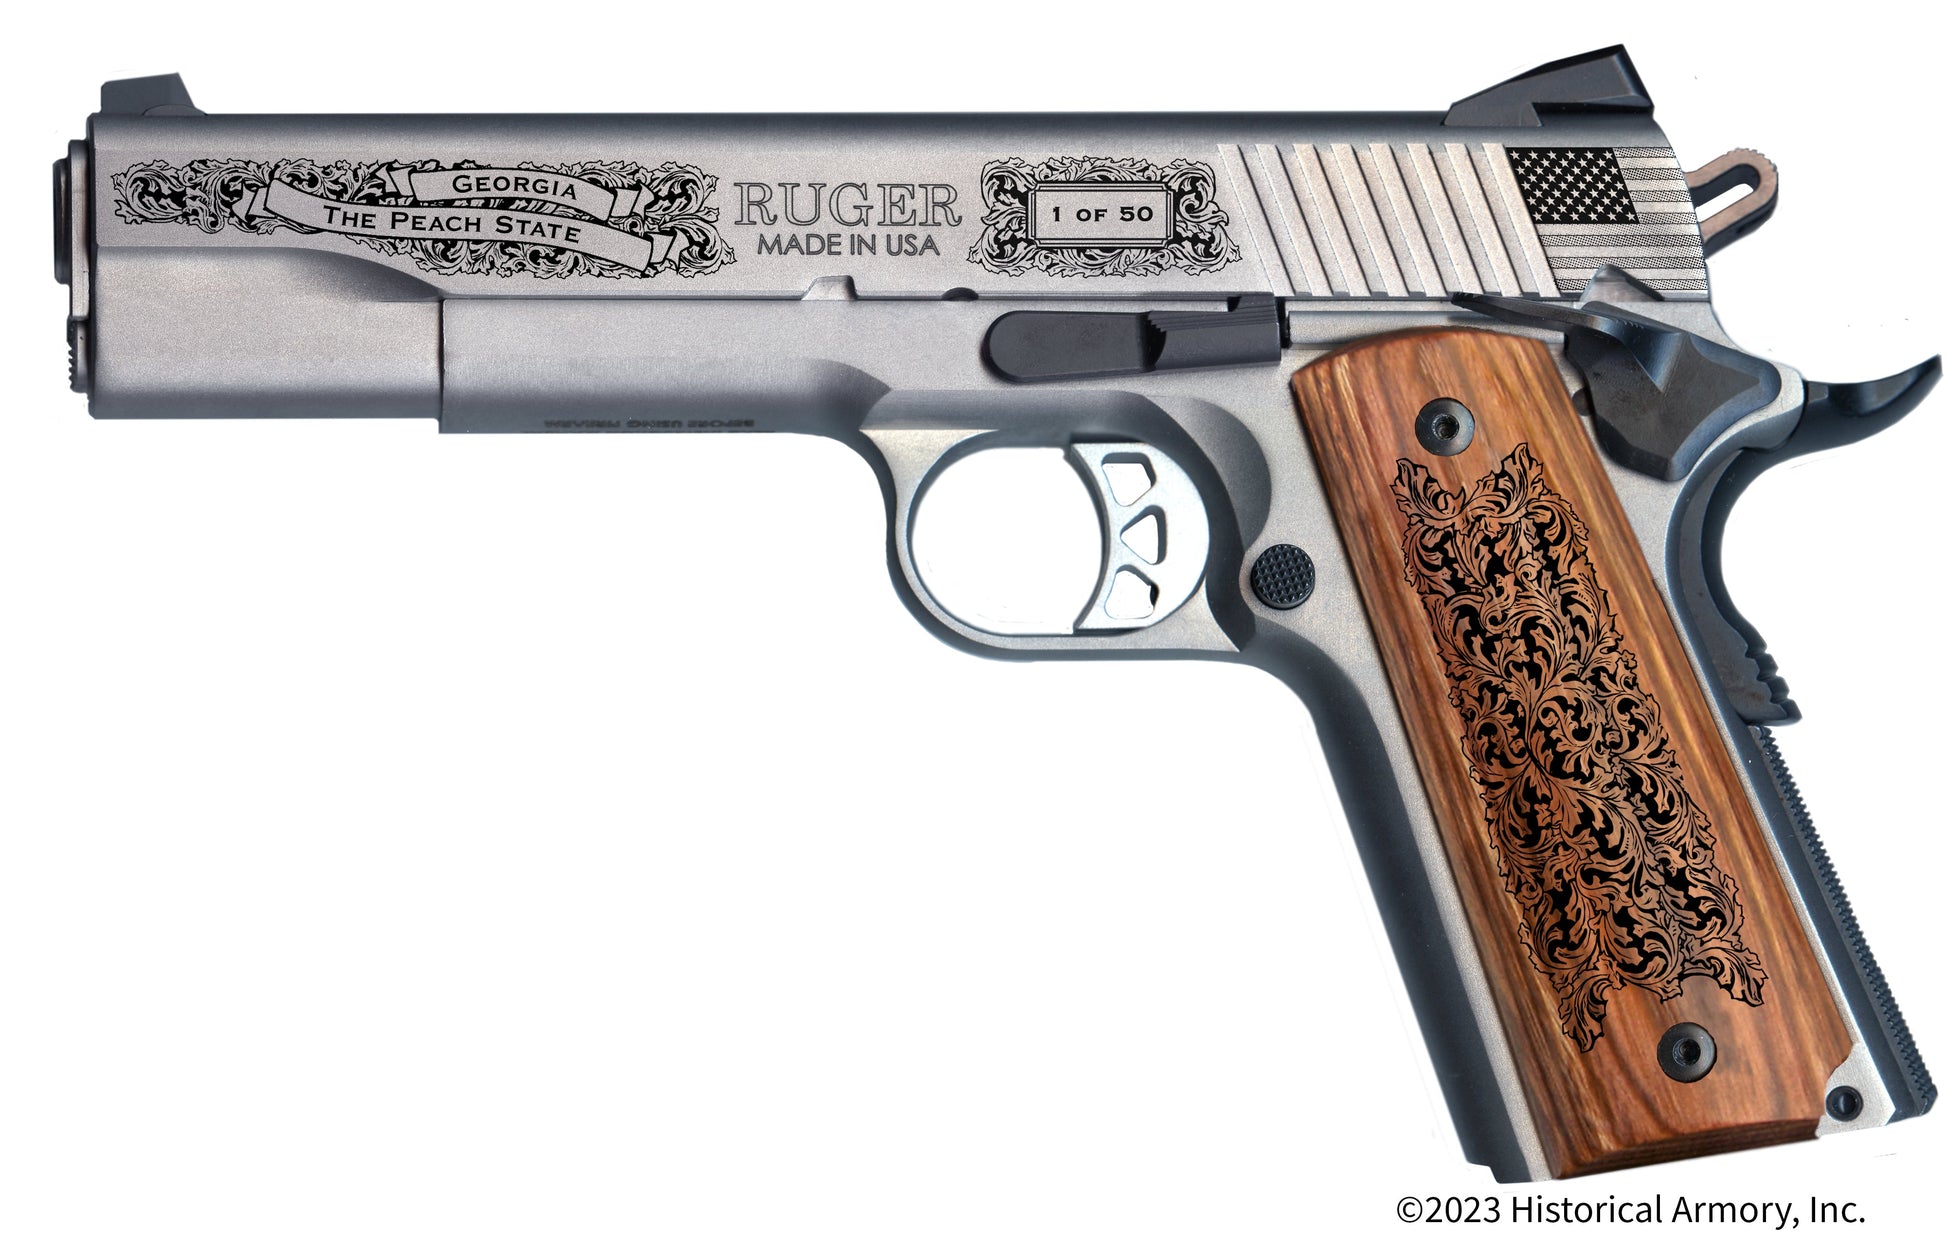 Lowndes County Georgia Engraved .45 Auto Ruger 1911